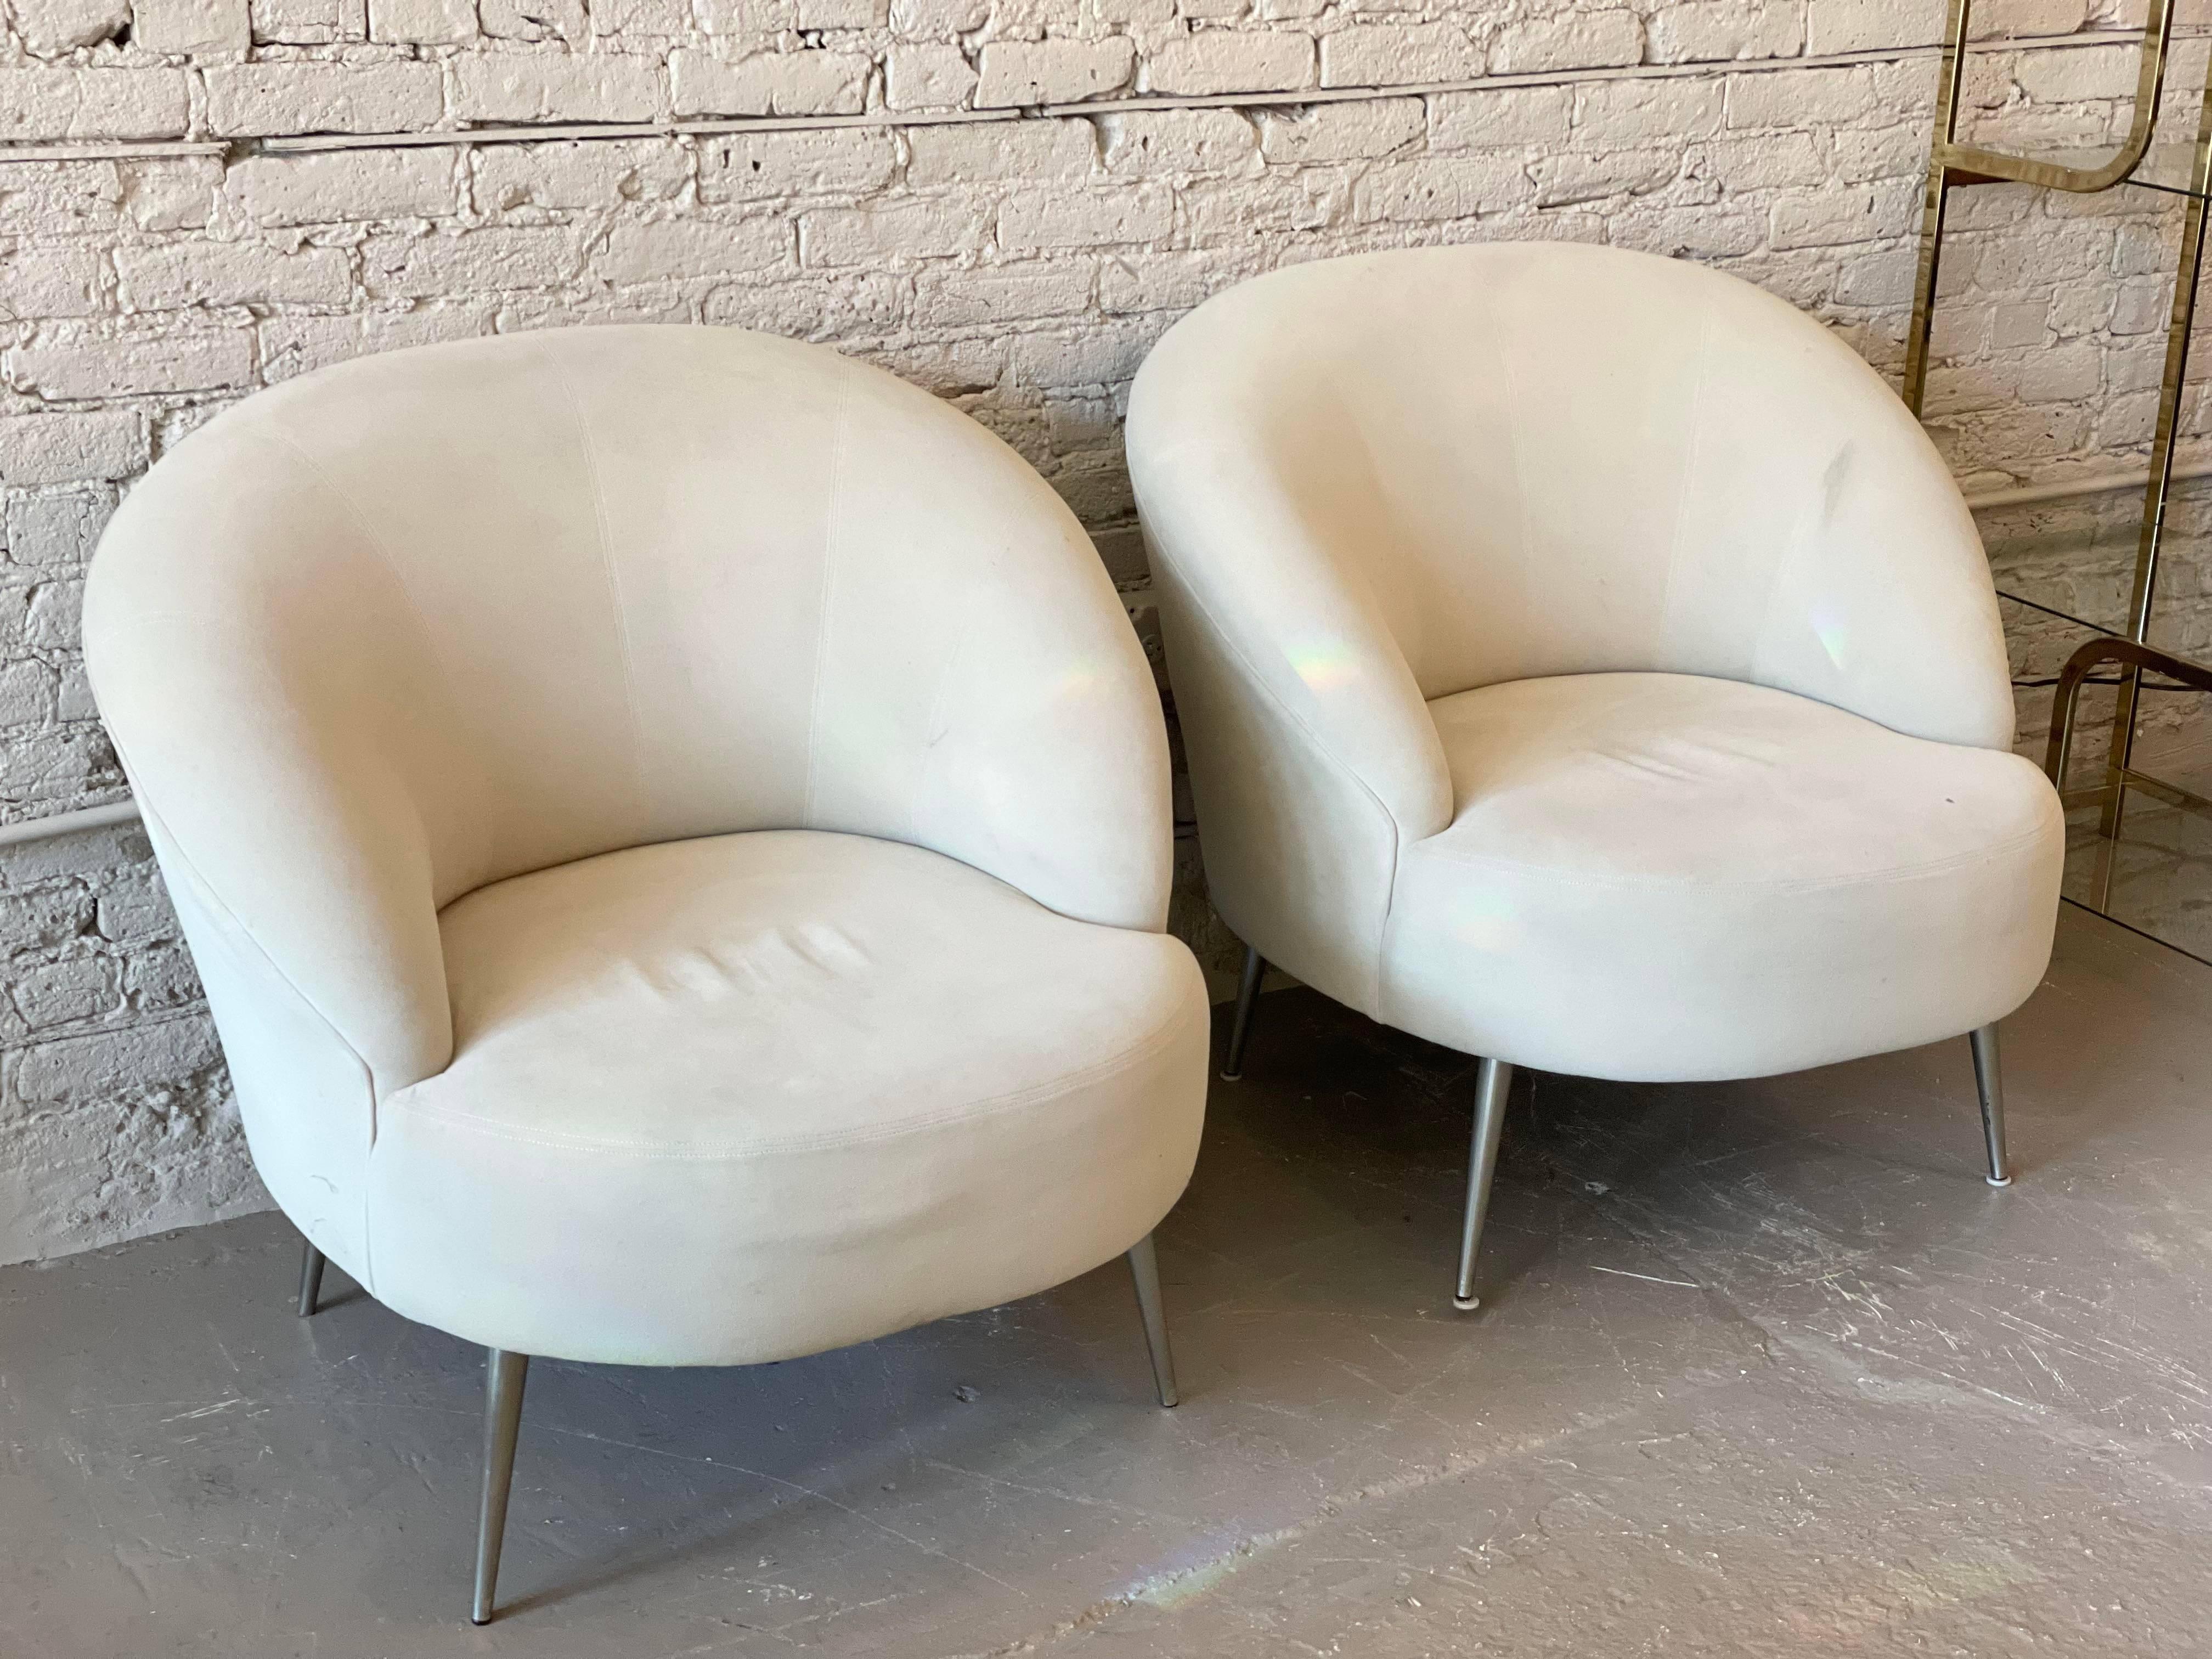 Oversized Postmodern Directional Lounge Chairs, a Pair In Good Condition For Sale In Chicago, IL